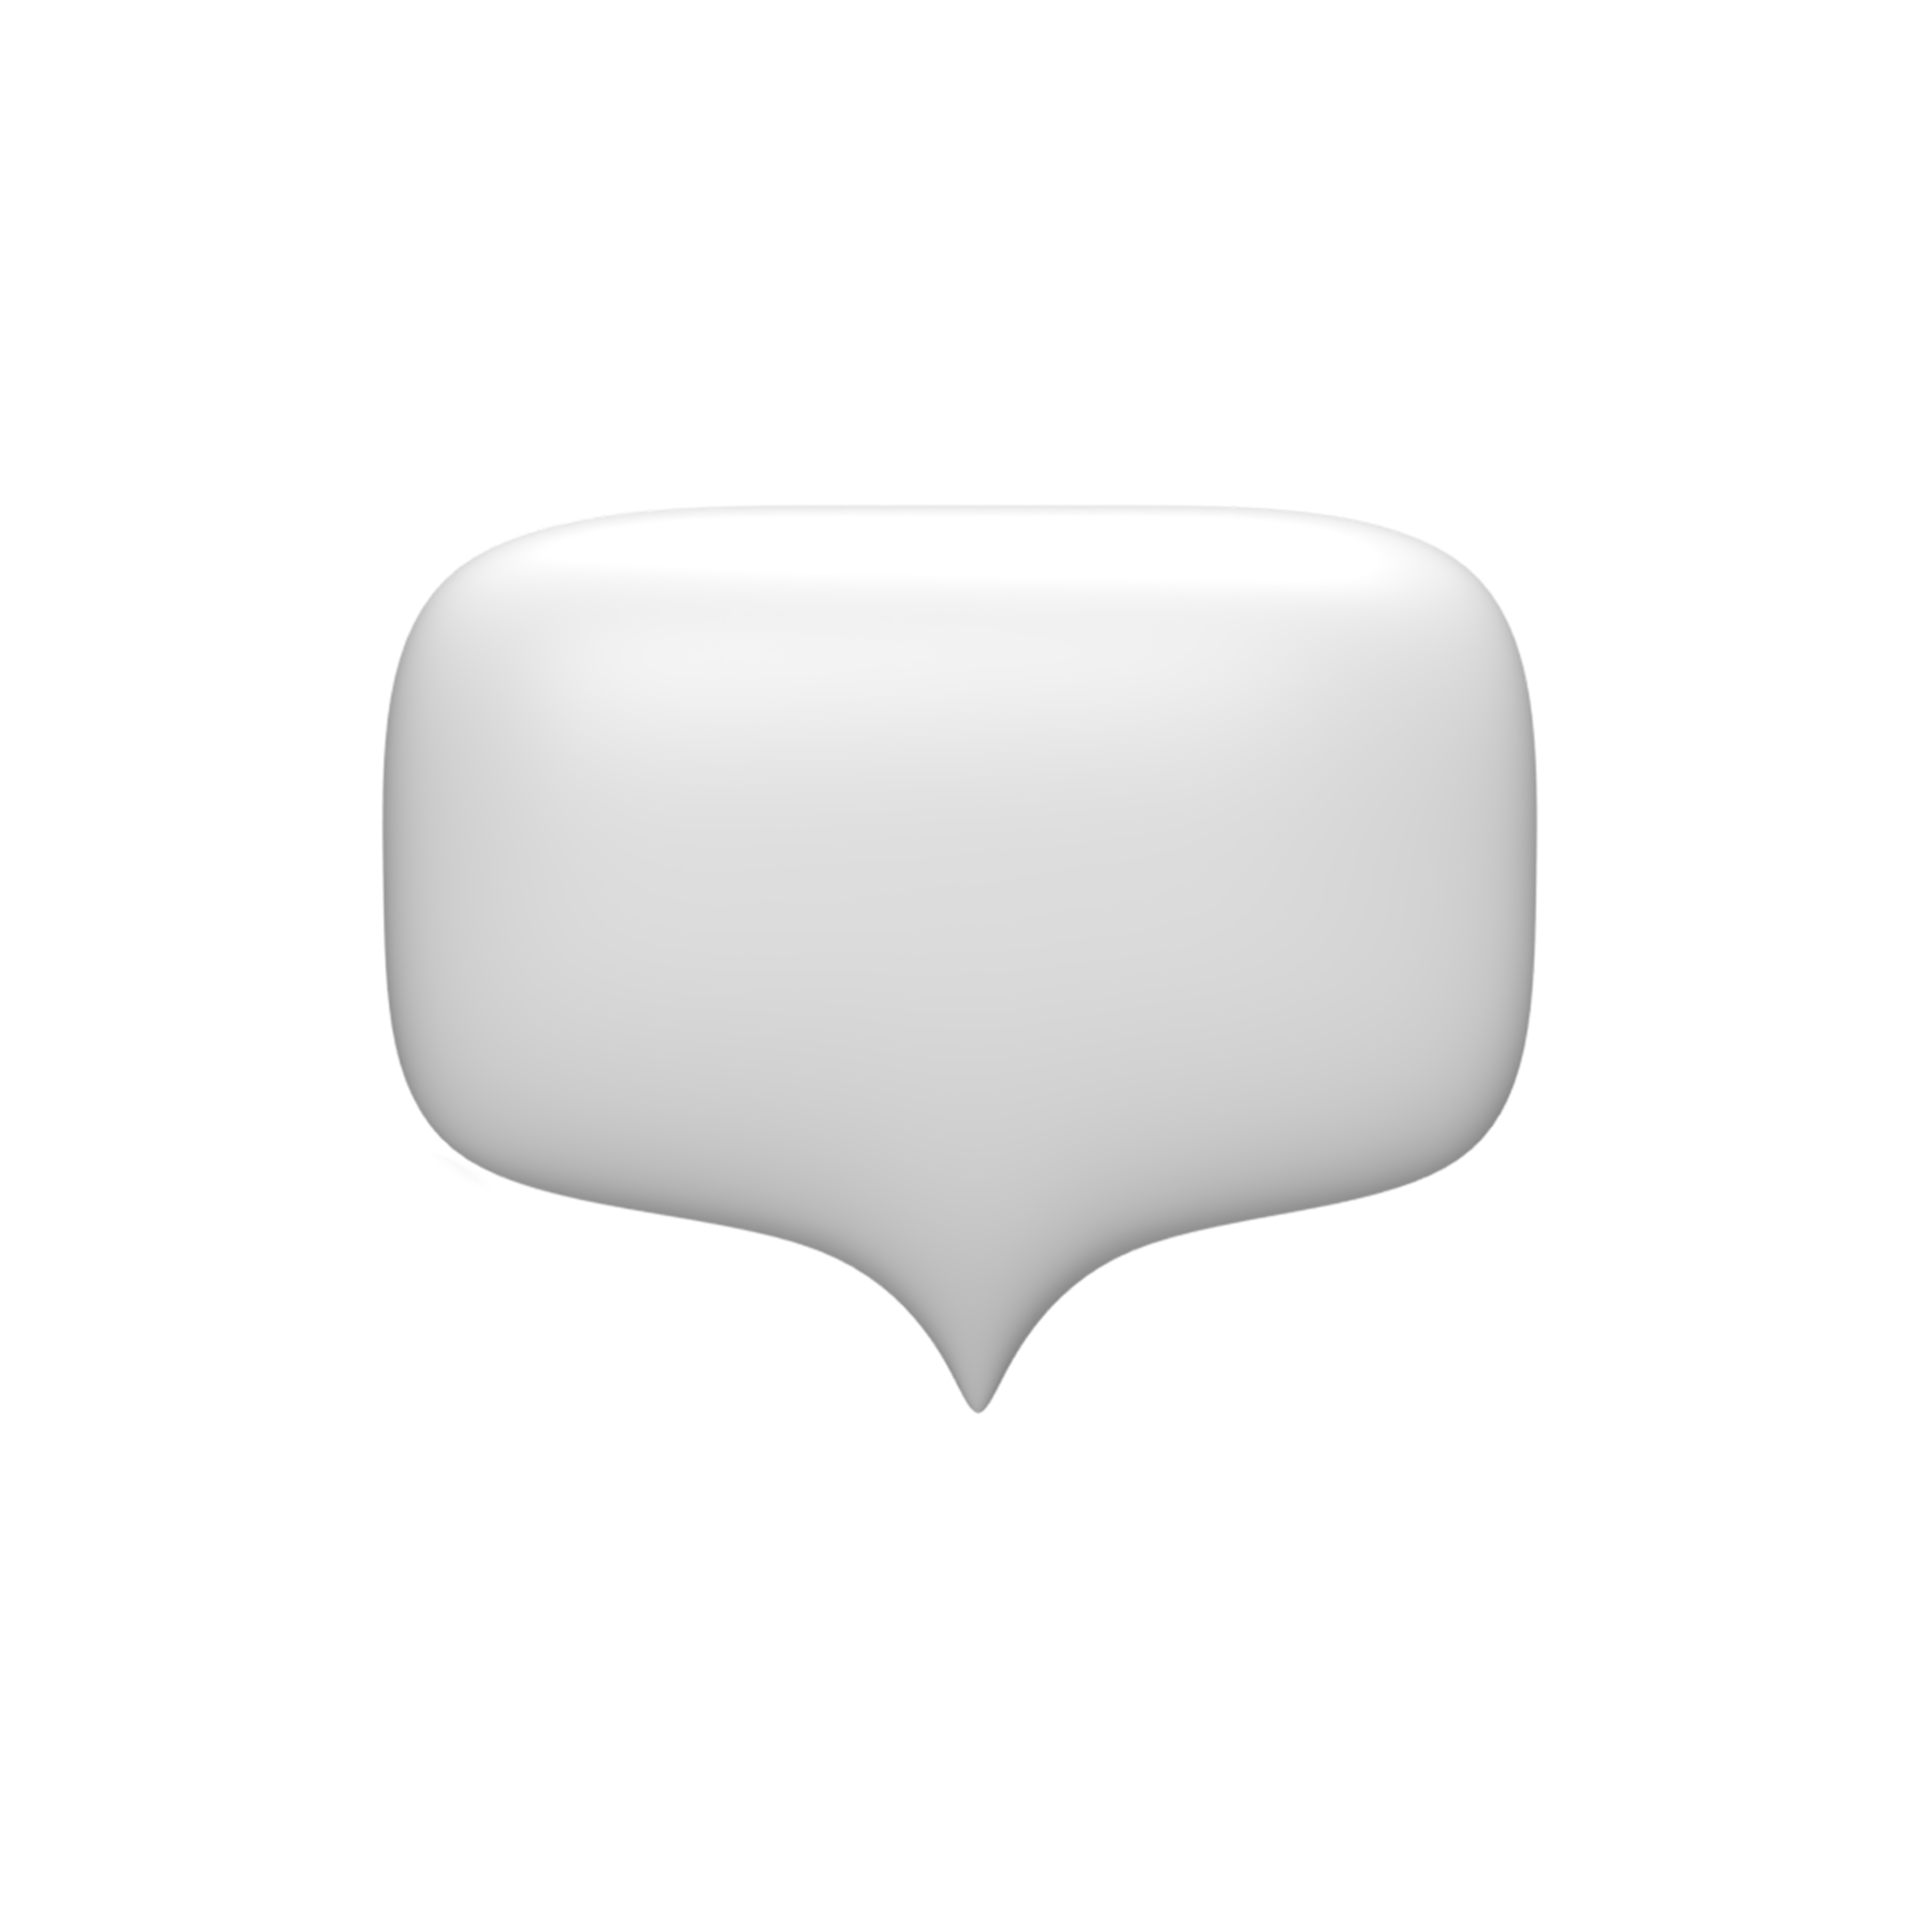 Bubble chat 3d symbol and icon. render object illustration 12794115 PNG